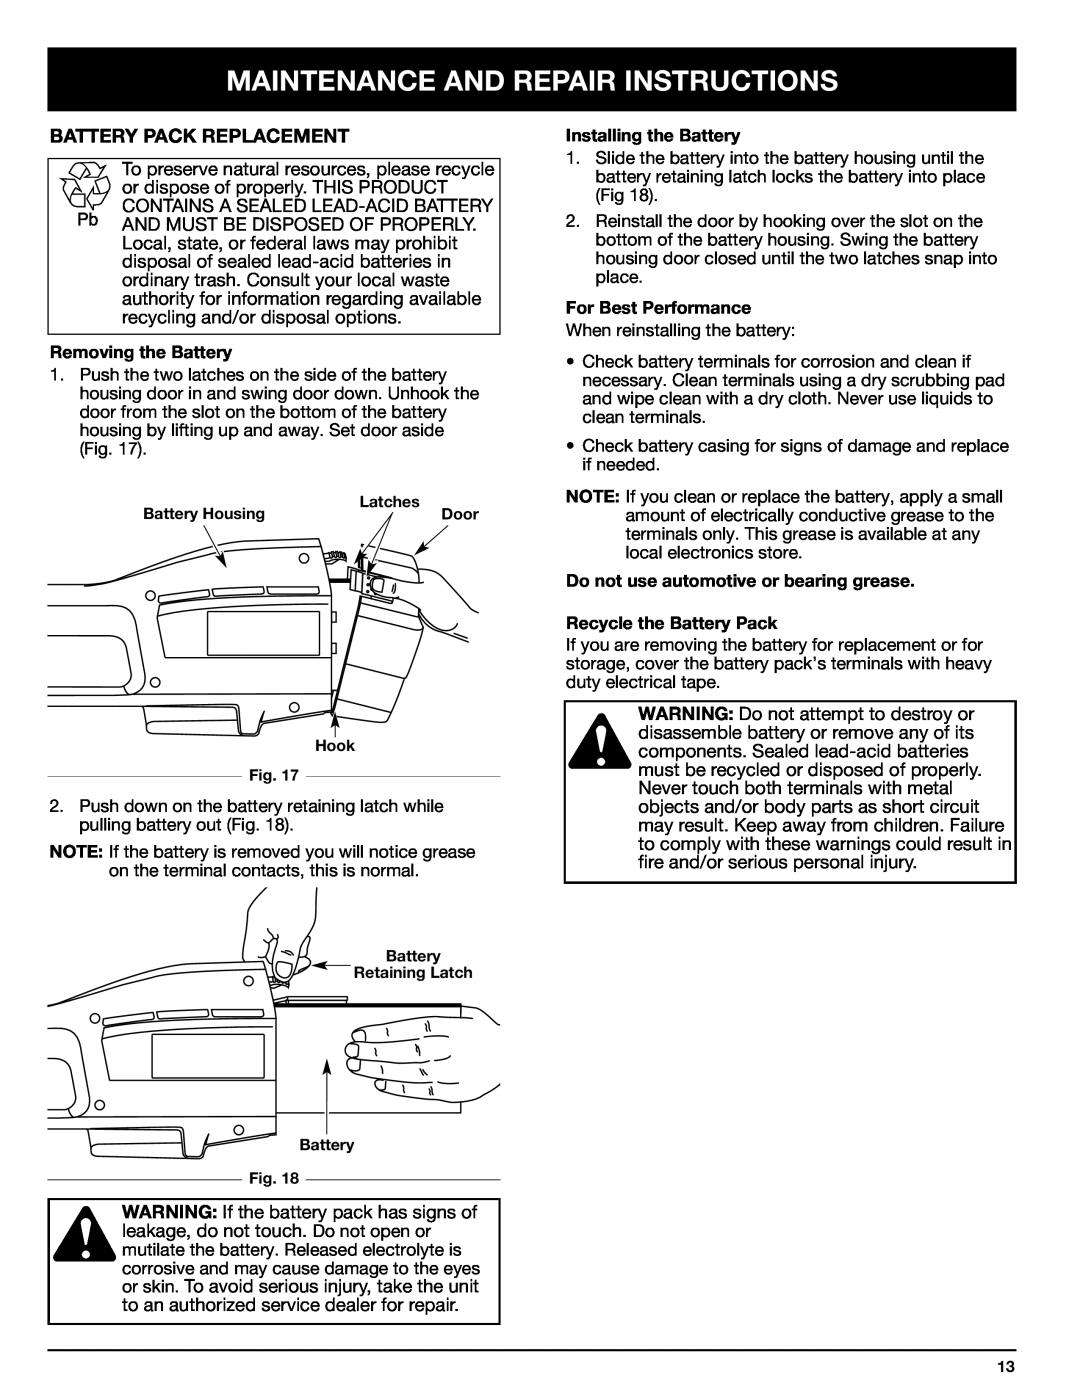 Ryobi 155r Battery Pack Replacement, Maintenance And Repair Instructions, Removing the Battery, Installing the Battery 